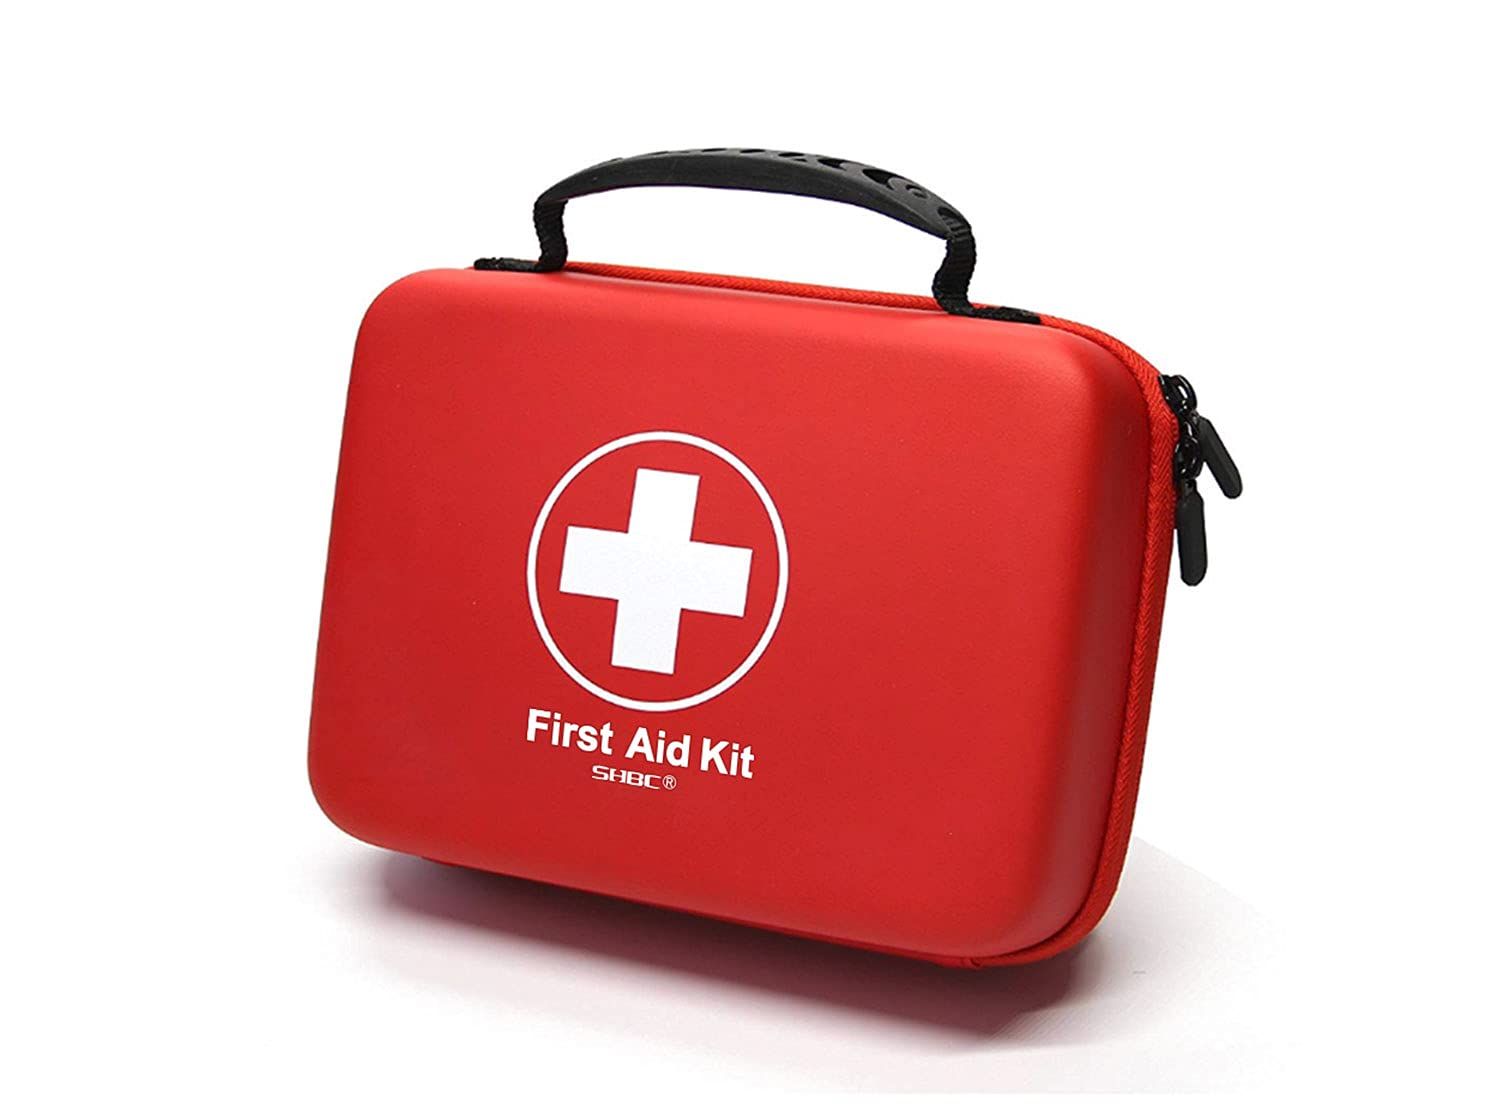 Compact First Aid Kit (228pcs) Designed for Family Emergency Care. Waterproof EVA Case and Bag is Id | Amazon (US)